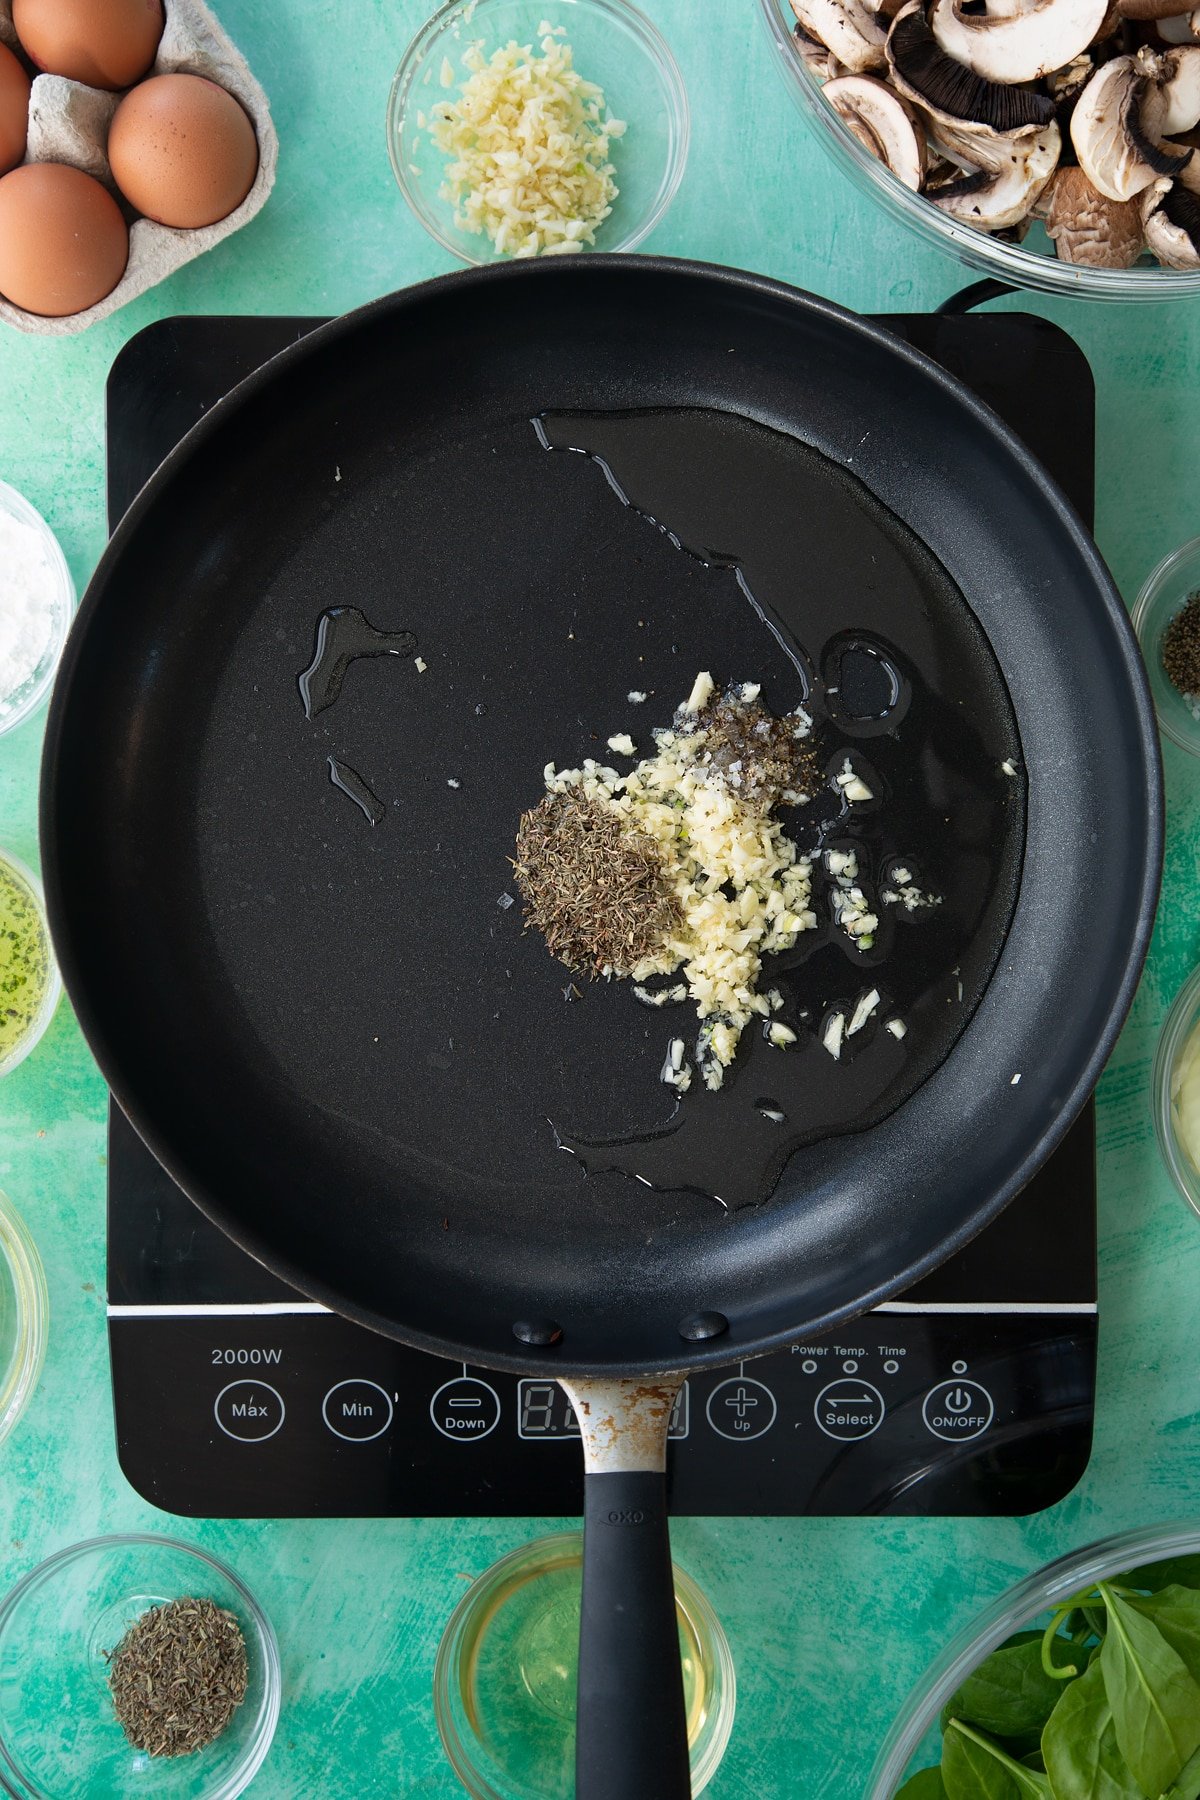 a large black frying pan on an induction hob with minced garlic, herbs and oil.